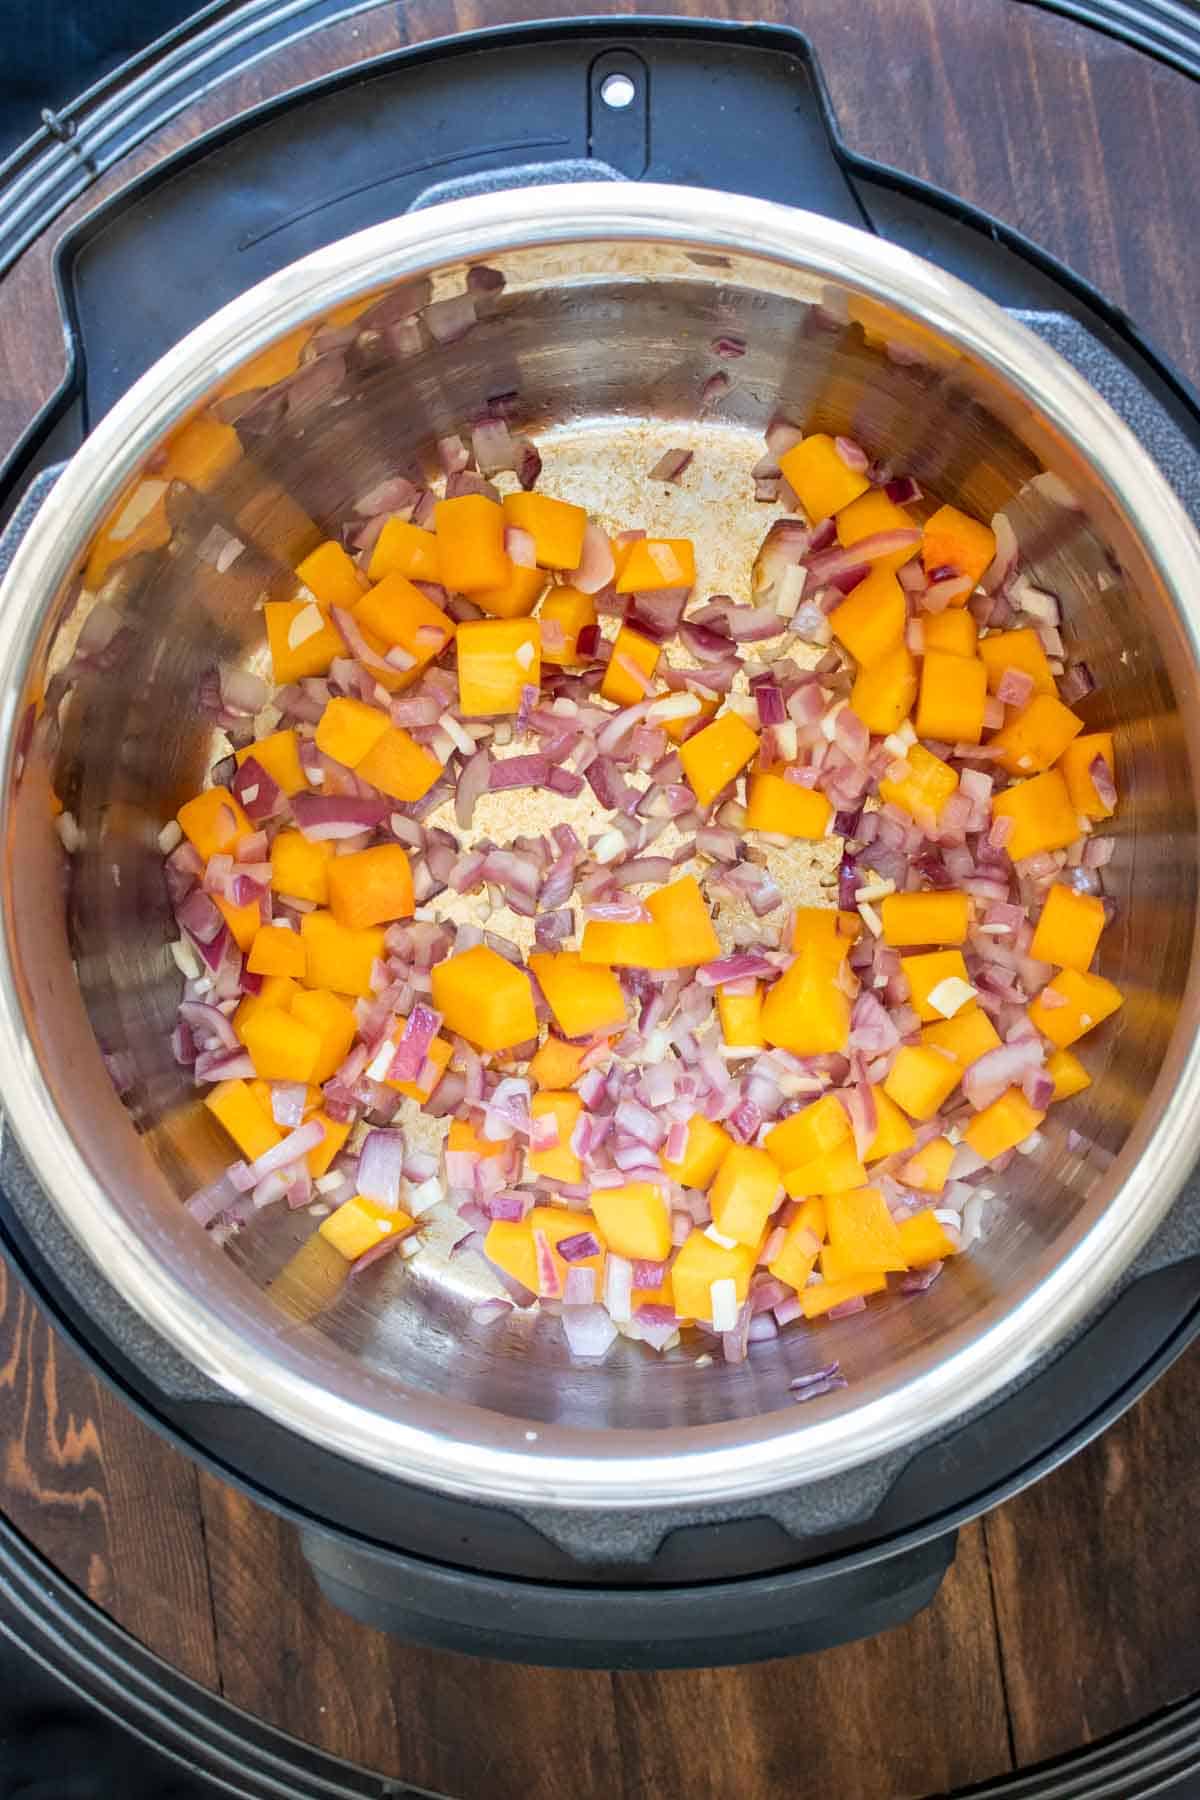 Sautéed butternut squash and red onions in a slow cooker